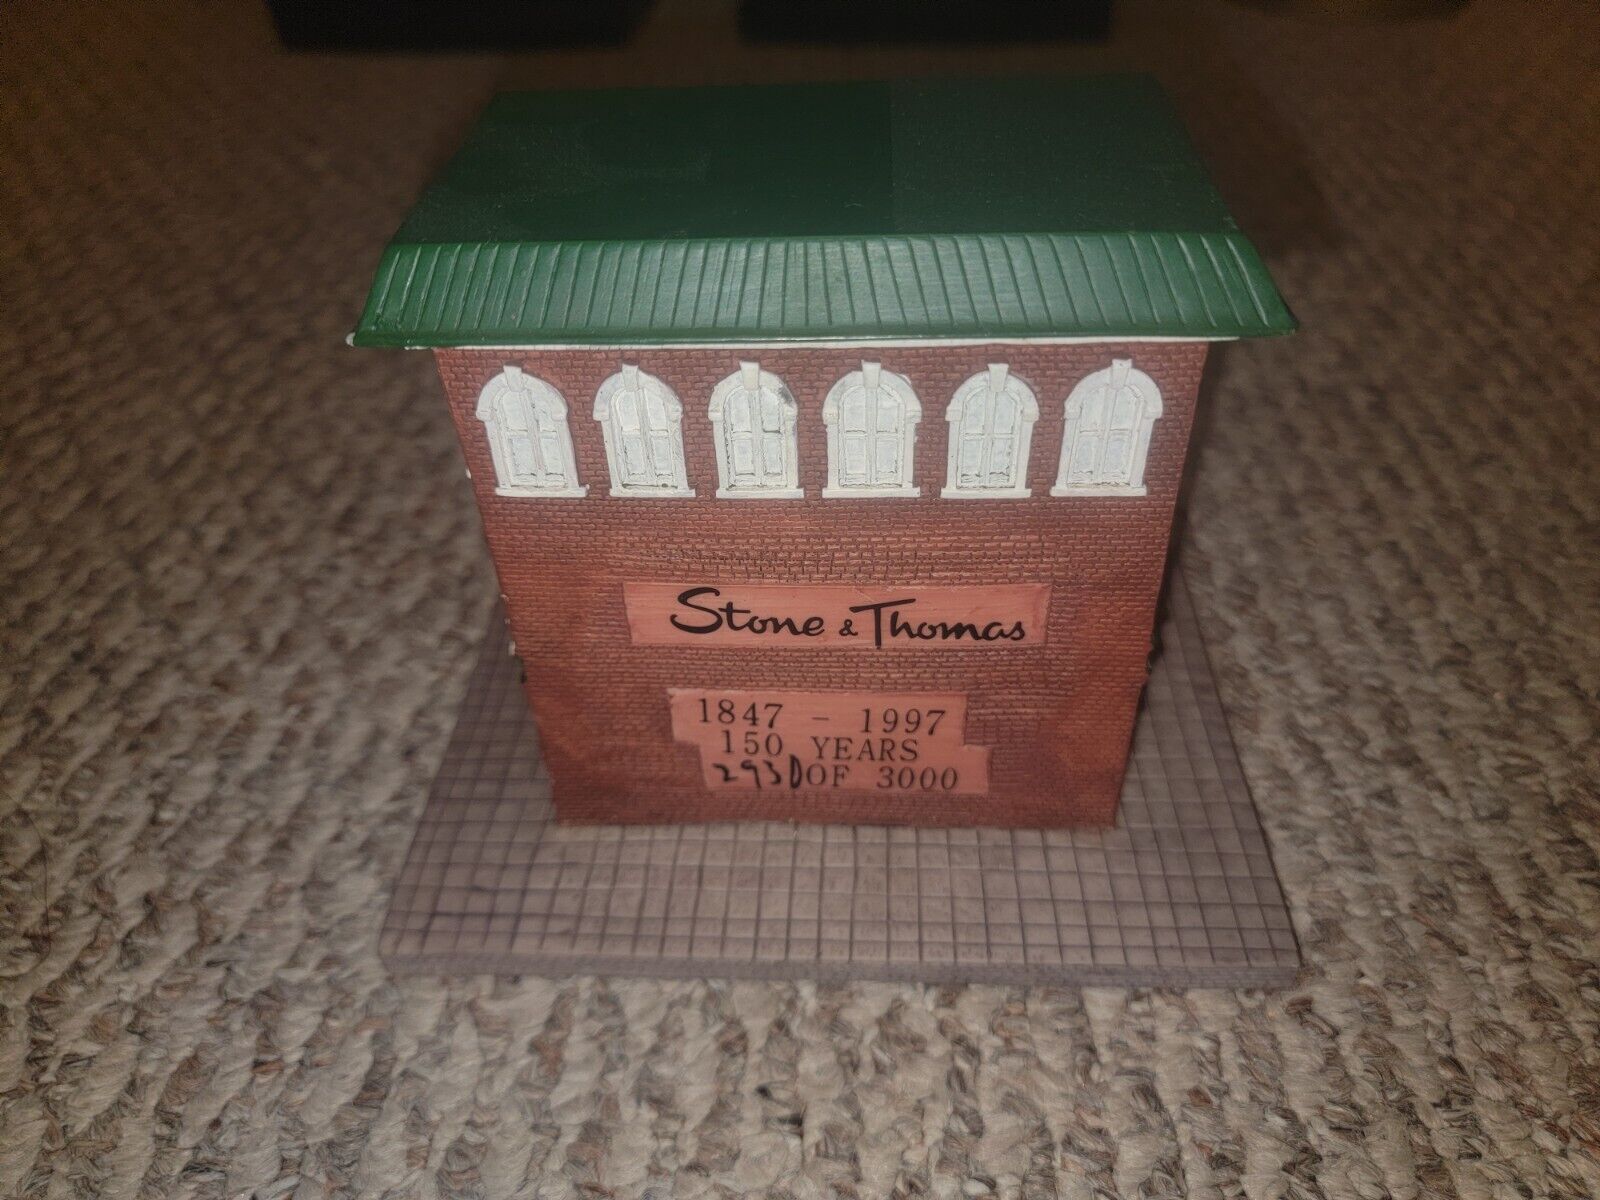 Stone and Thomas promotional store item The Beehive Limited #2930/3000 pieces